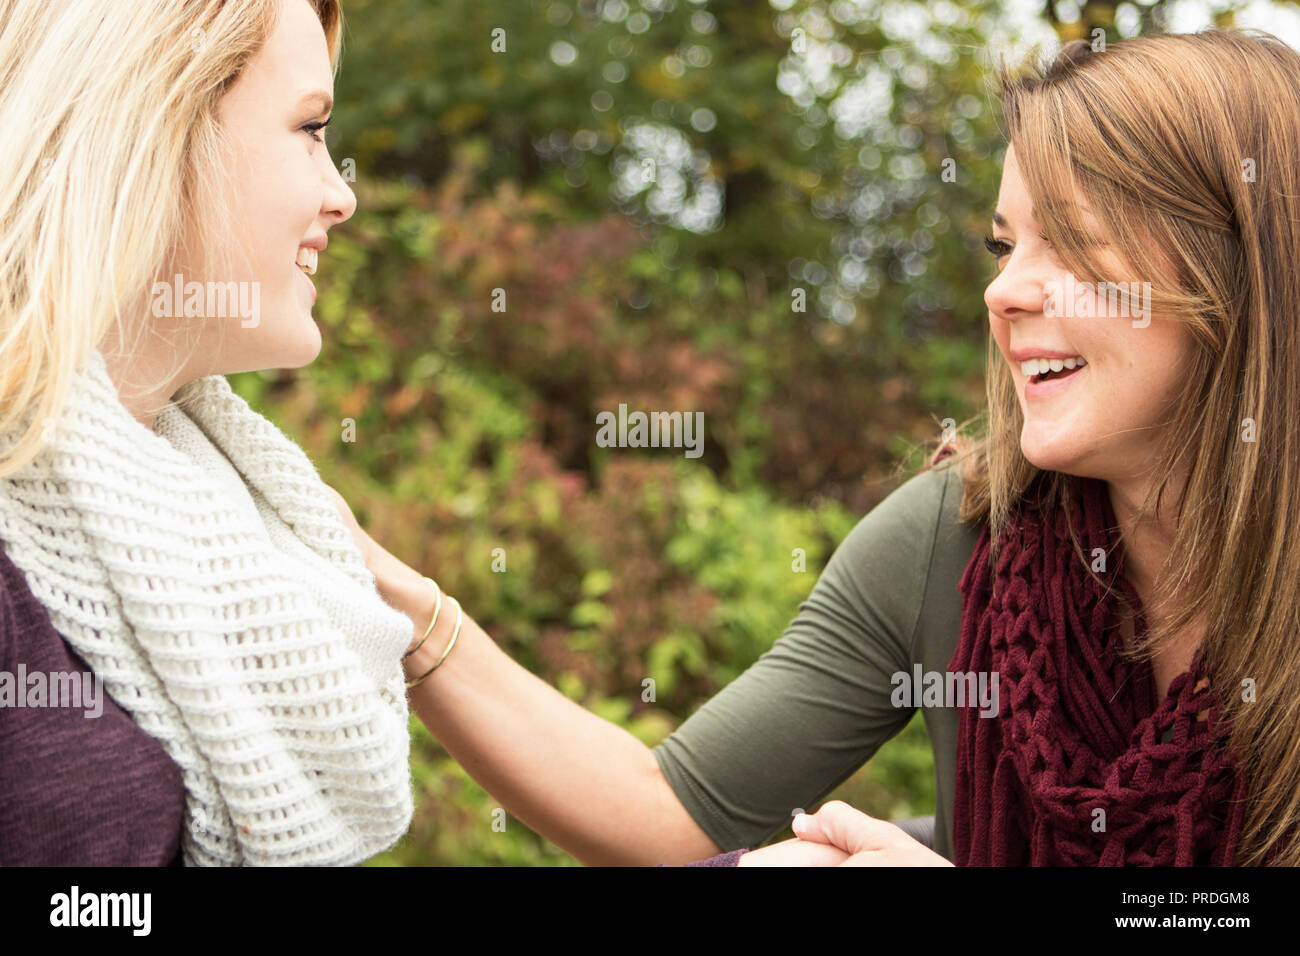 Older woman giving advice to a younger woman. Stock Photo